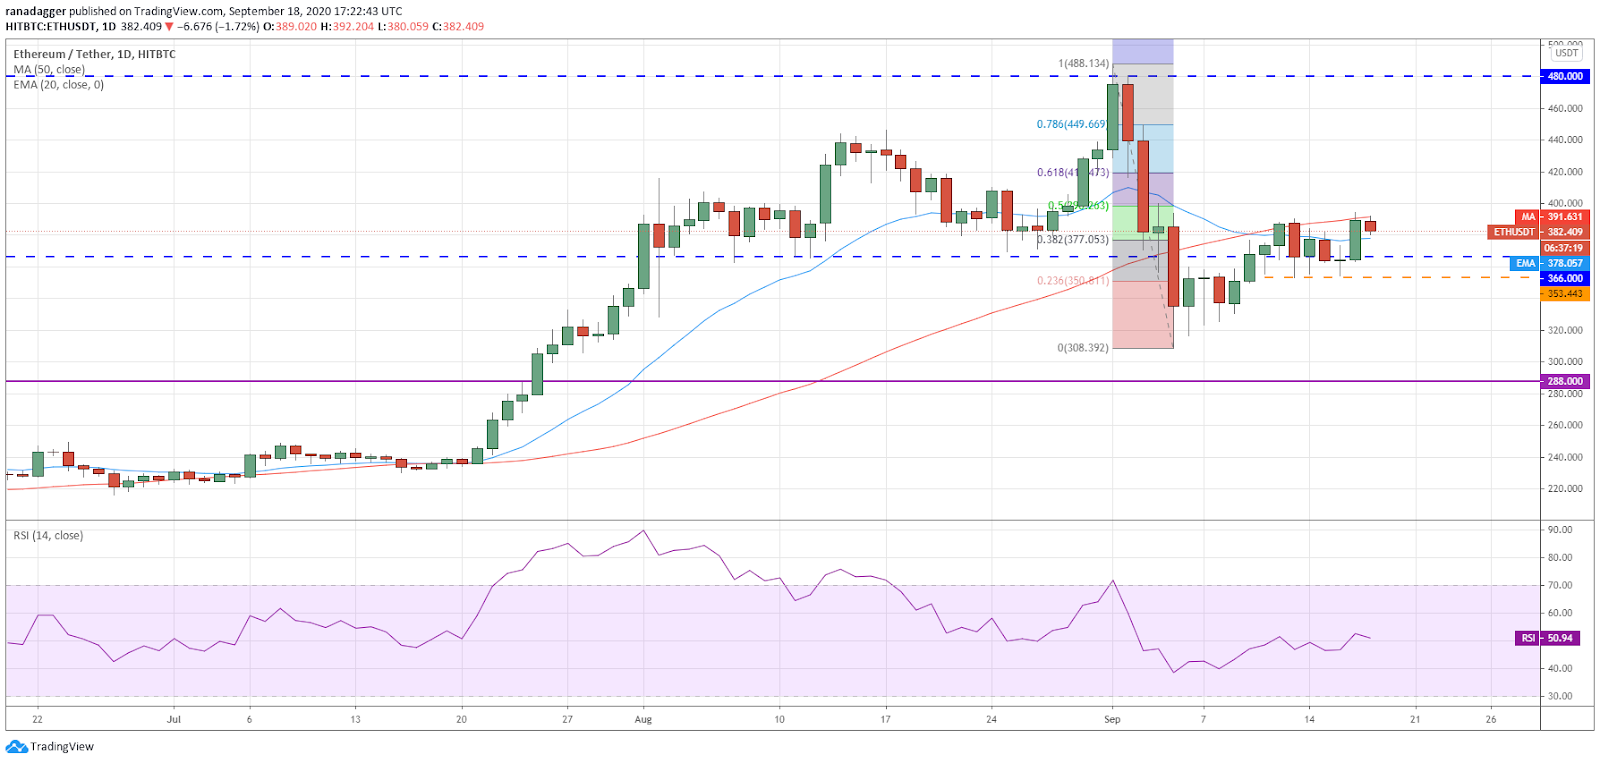 ETH/USD daily chart. Source: TradingView​​​​​​​